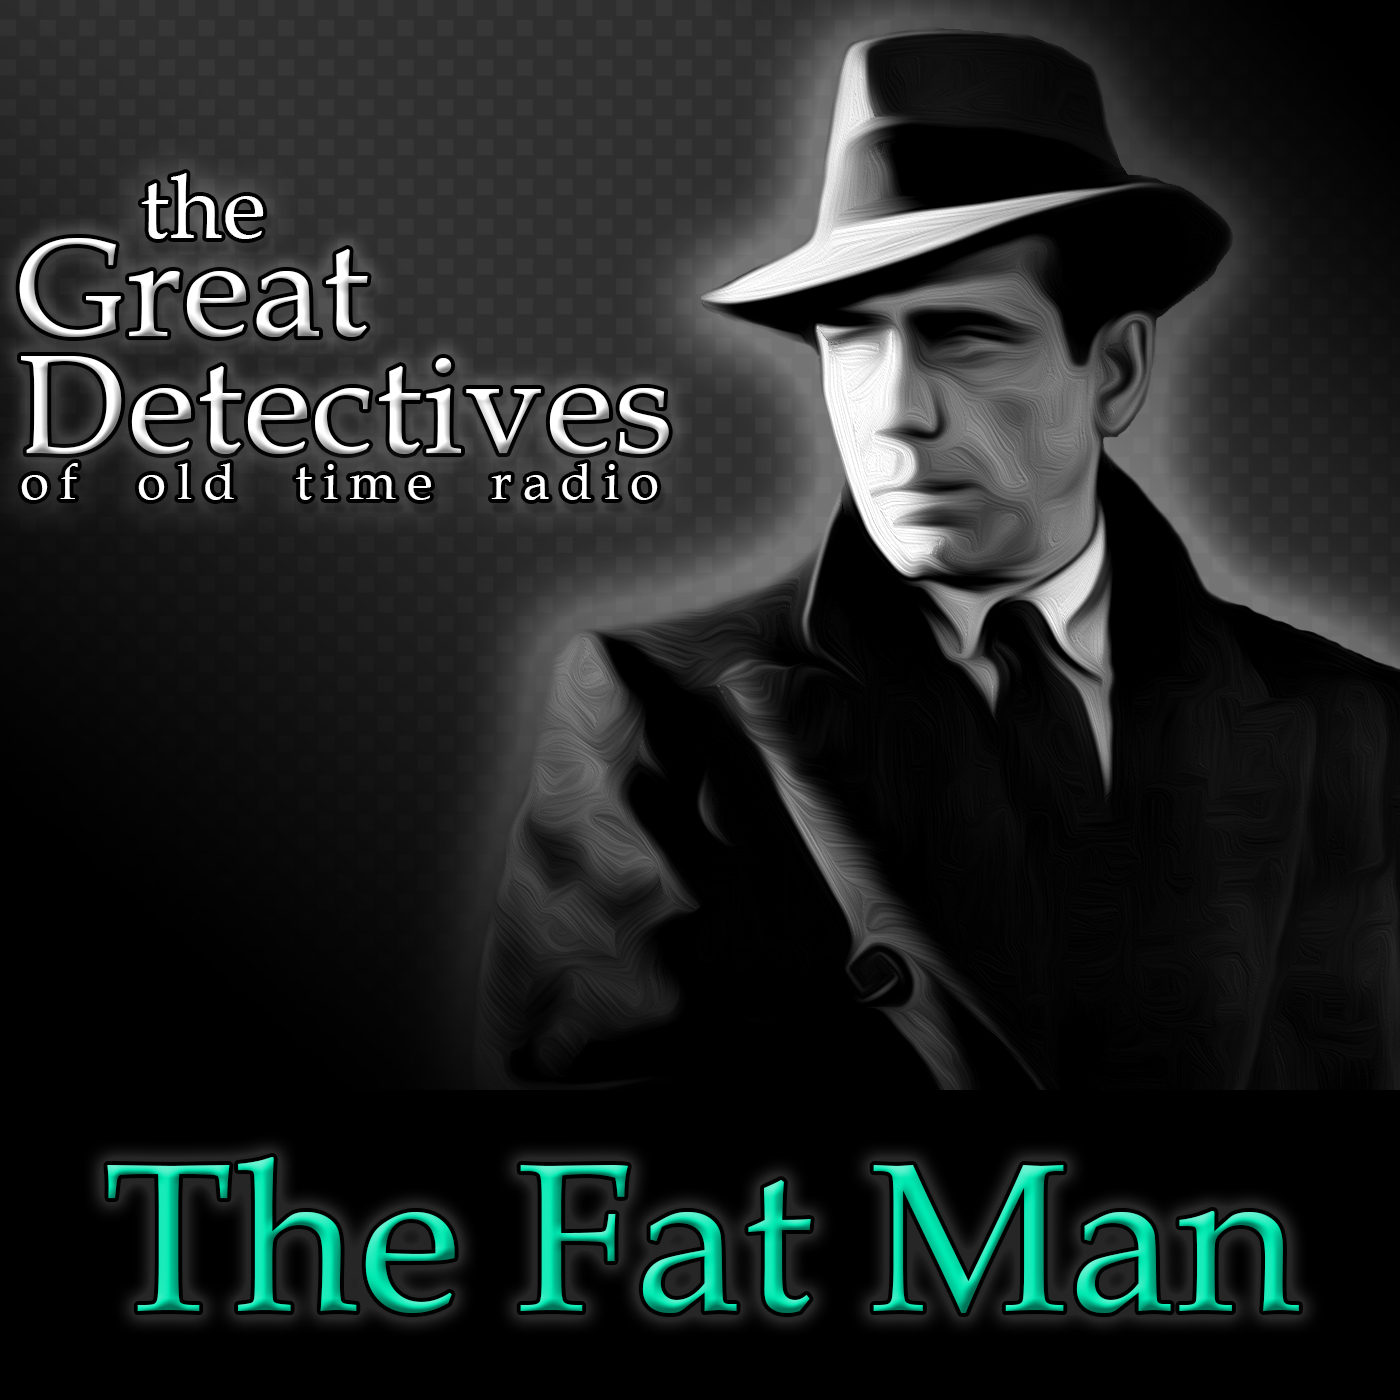 The Great Detectives Present the Fat Man